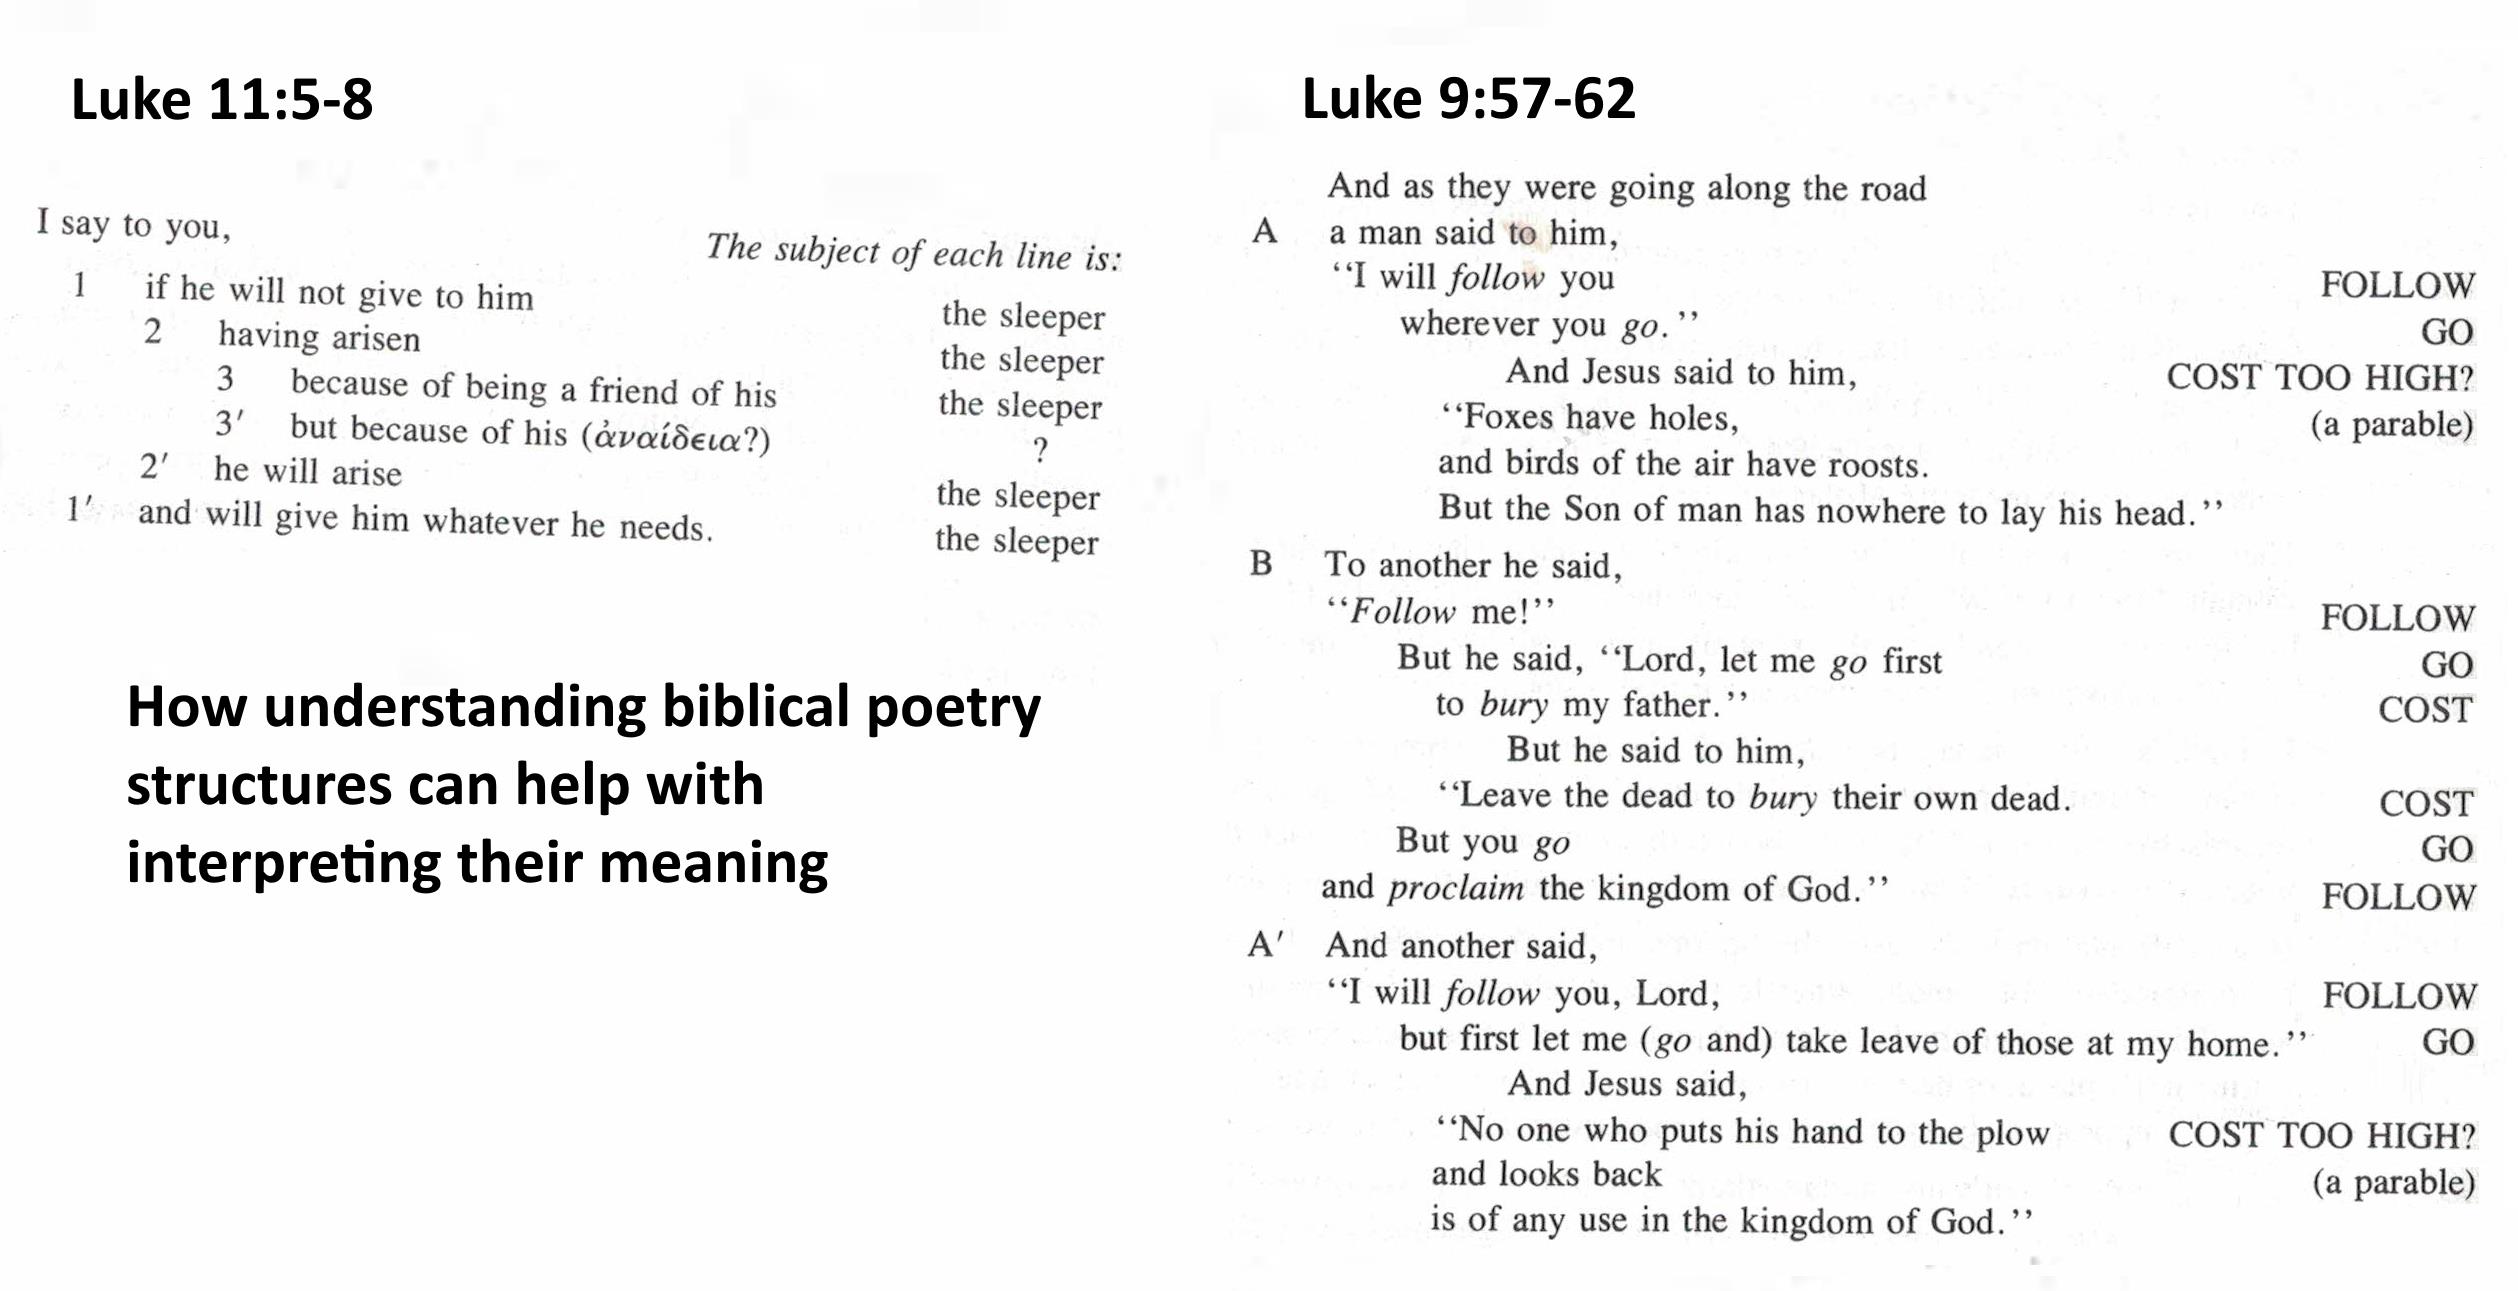 2 portions from Luke arranged so how they are poems is made clearer by the layout